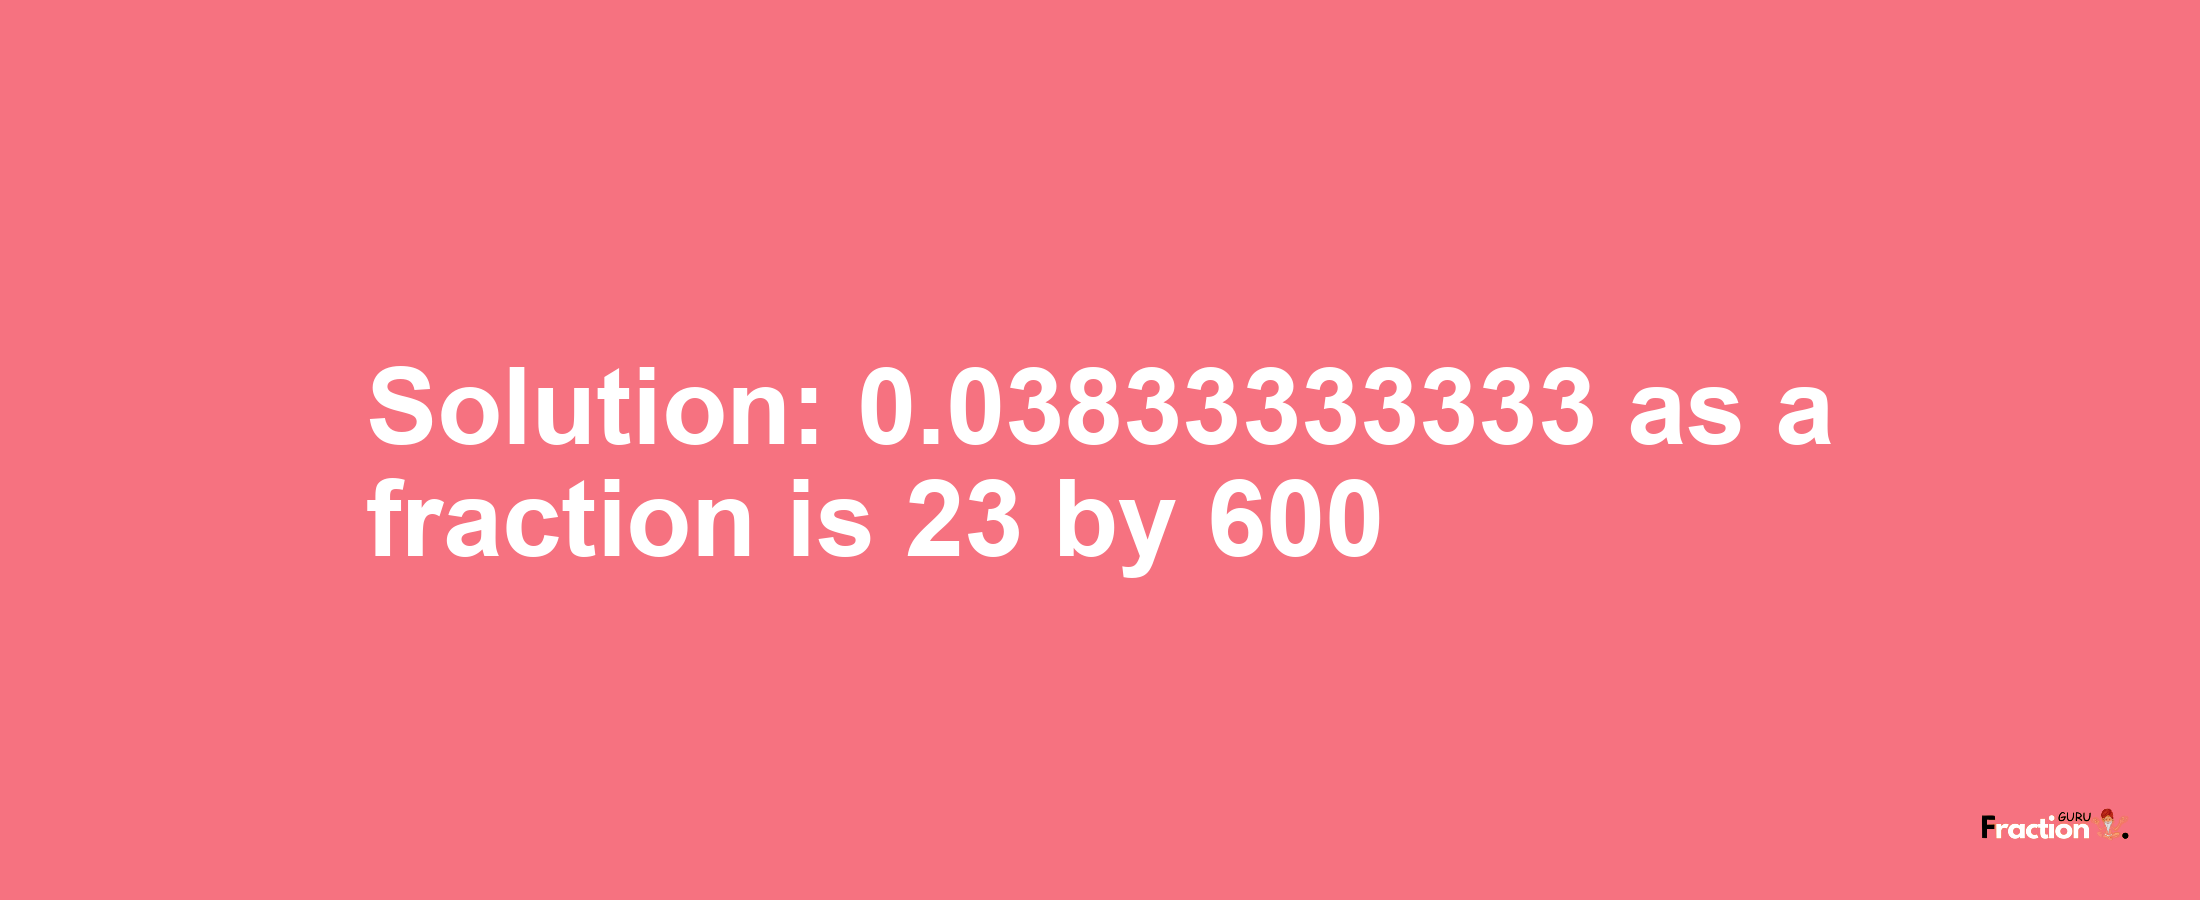 Solution:0.03833333333 as a fraction is 23/600